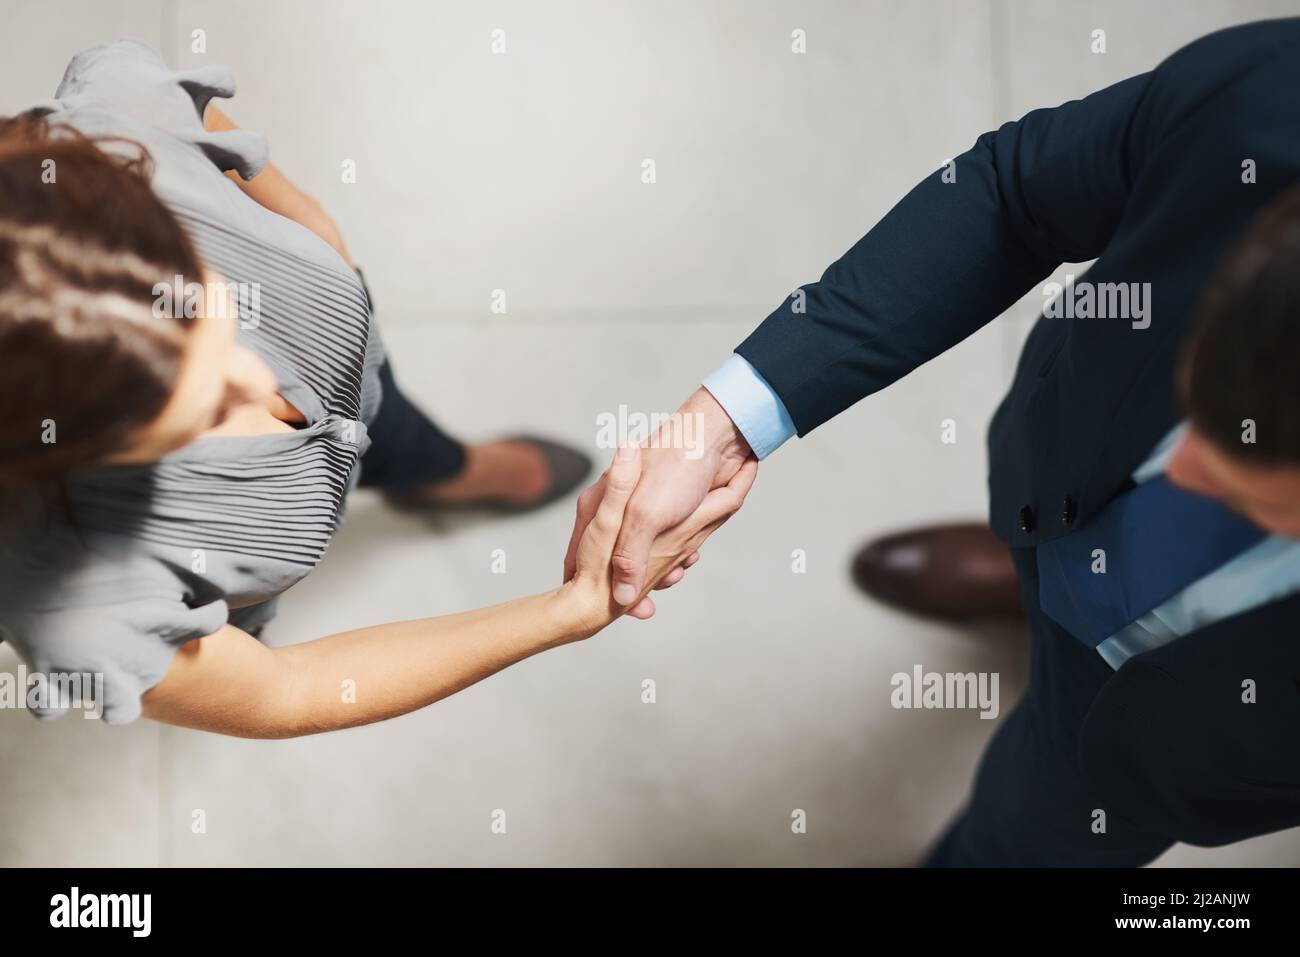 Well accomplish some great things together. High angle shot of two businesspeople shaking hands in an office. Stock Photo